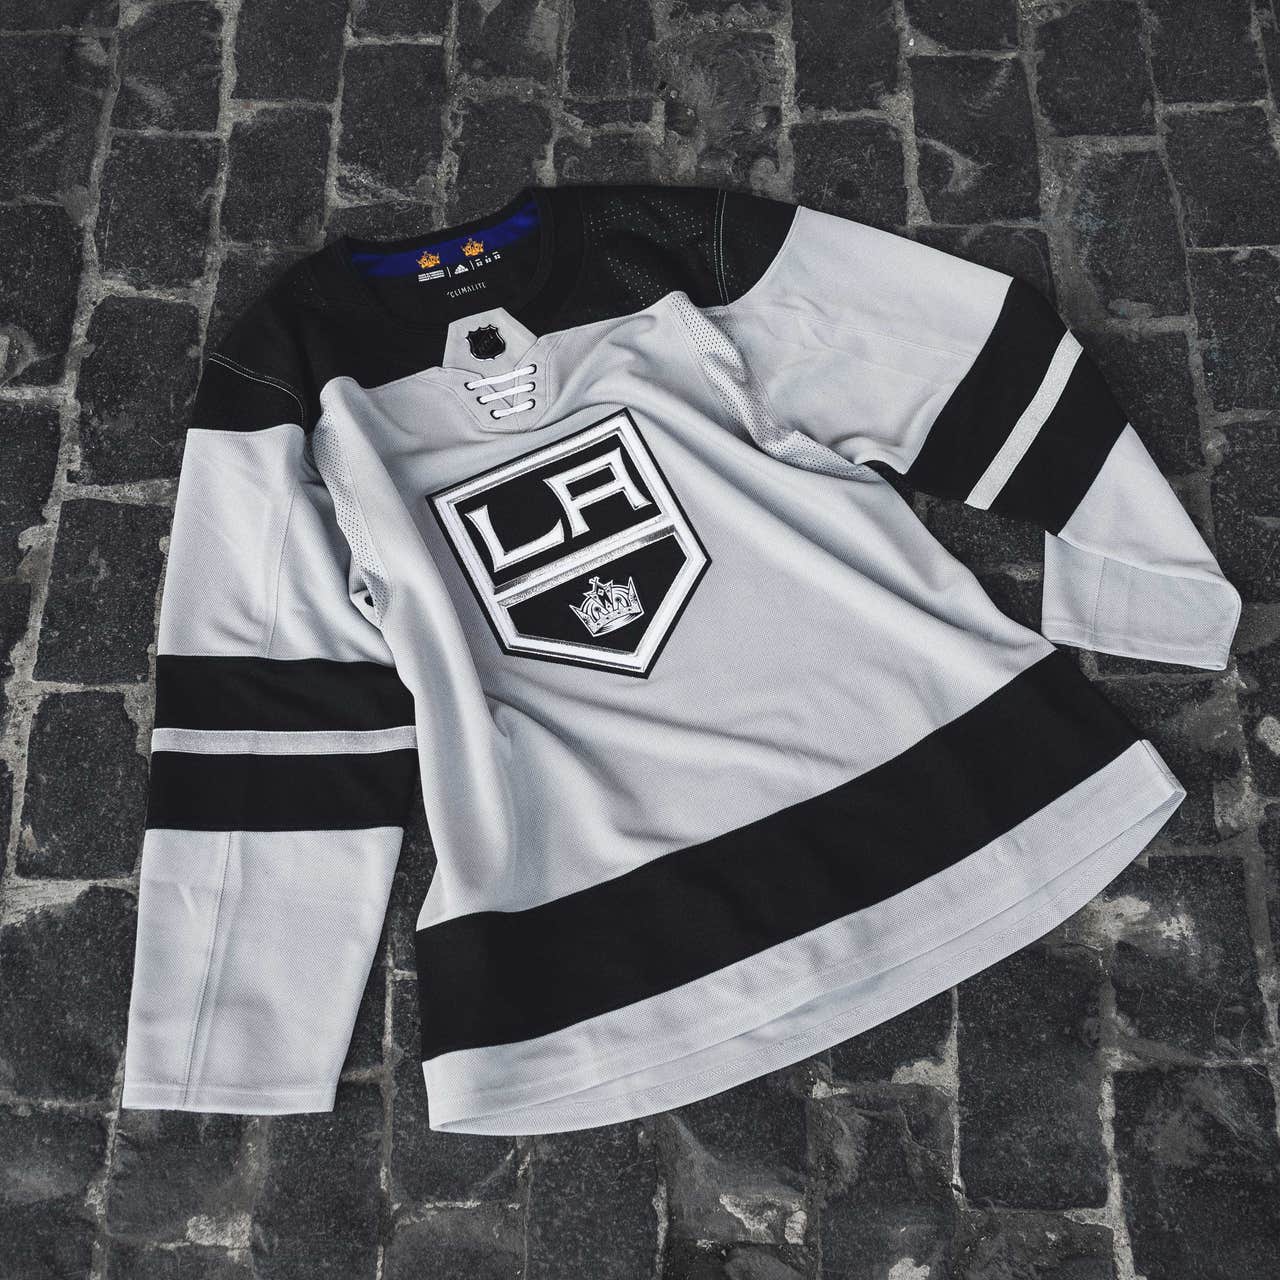 On Sale Now: The New Adidas Adizero Authentic Jerseys for the Columbus Blue  Jackets